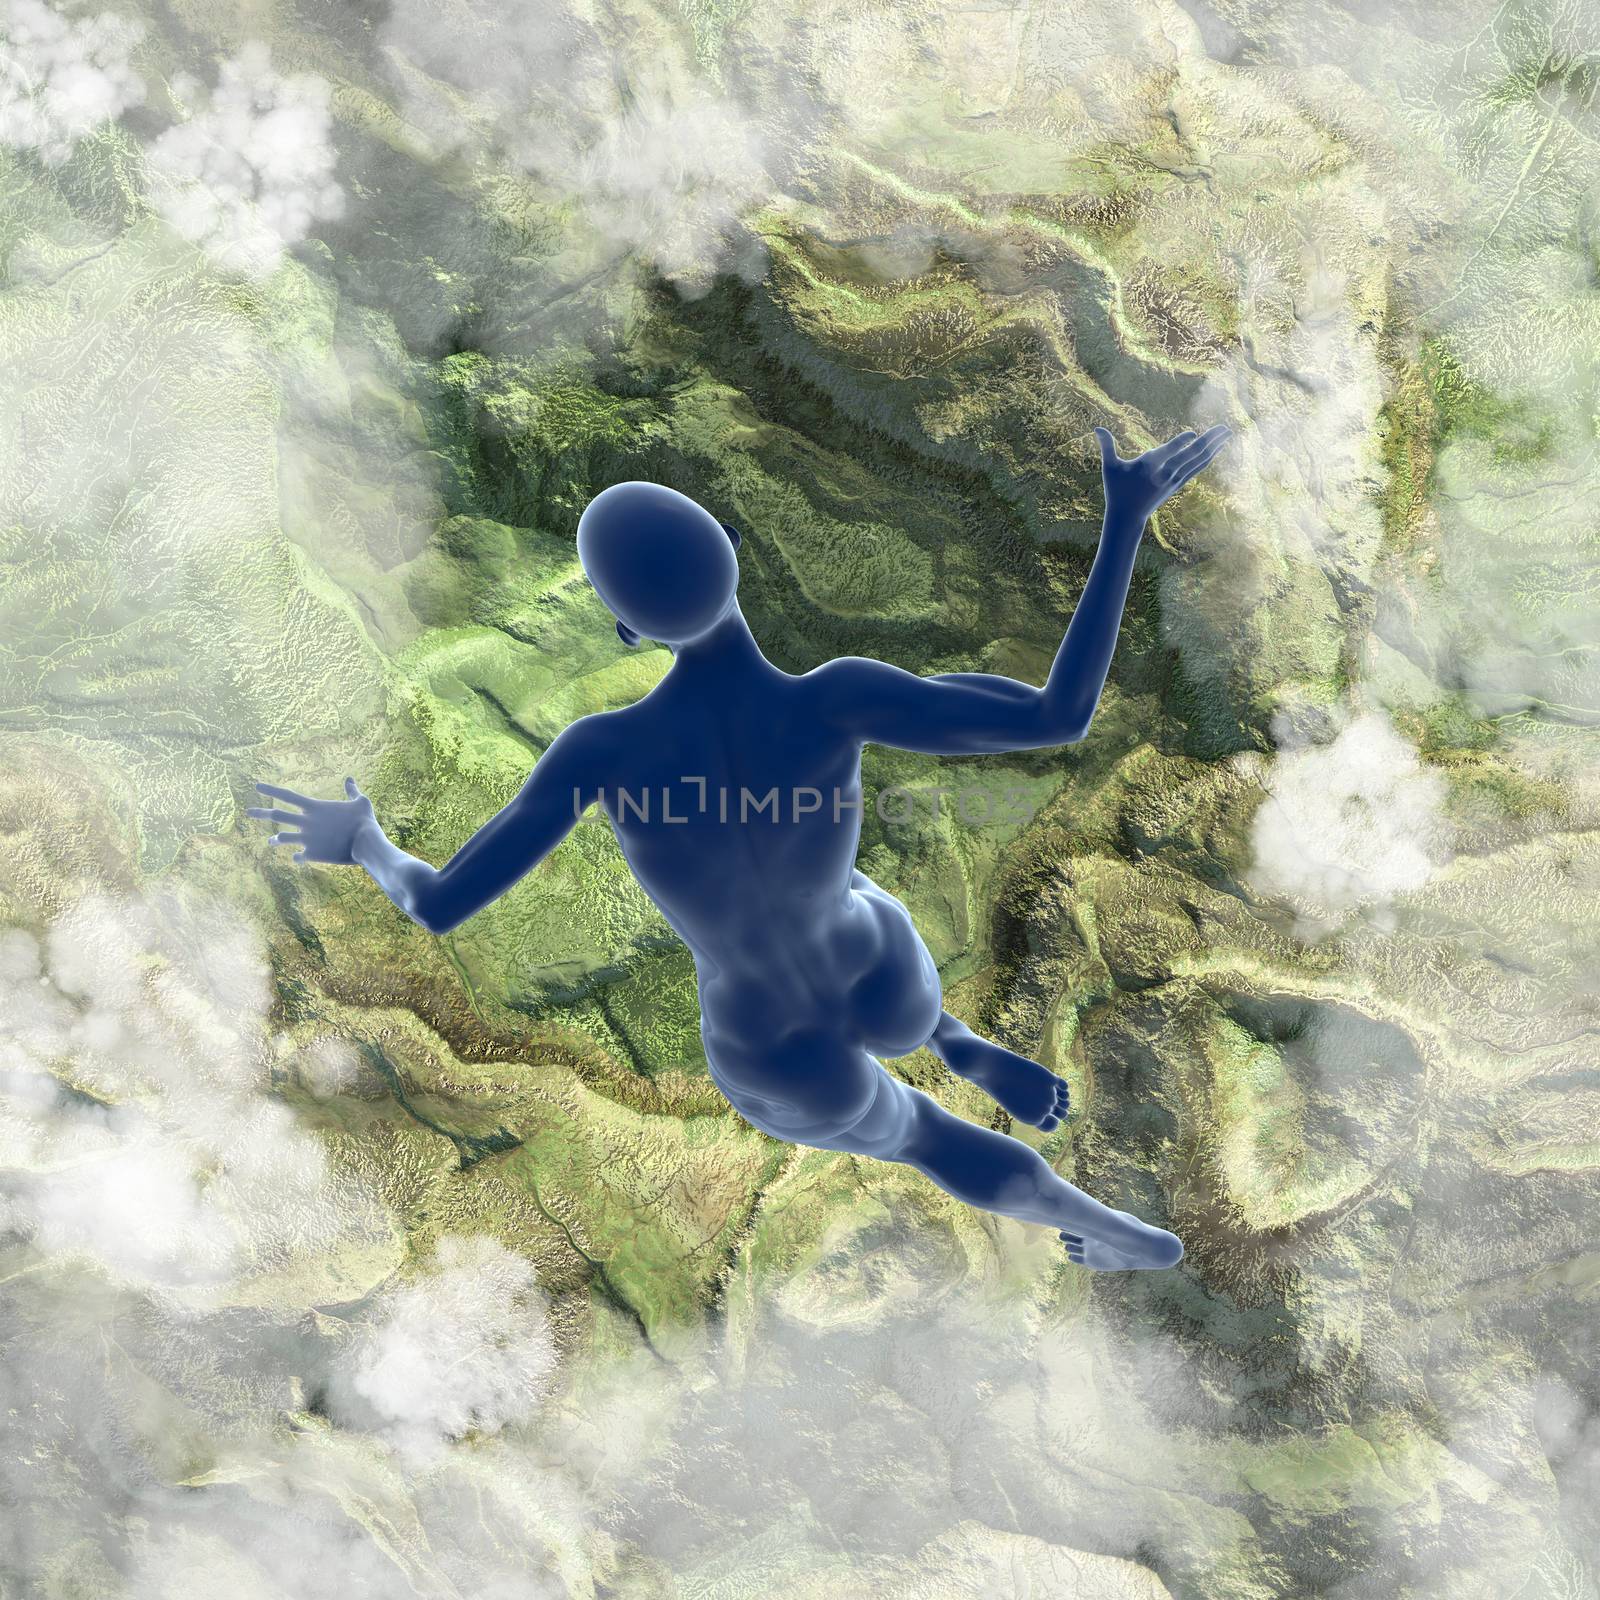 Slim attractive sportswoman flying in the air full of clouds over earth background. Fantasy fairy virtual reality 3d illustration.